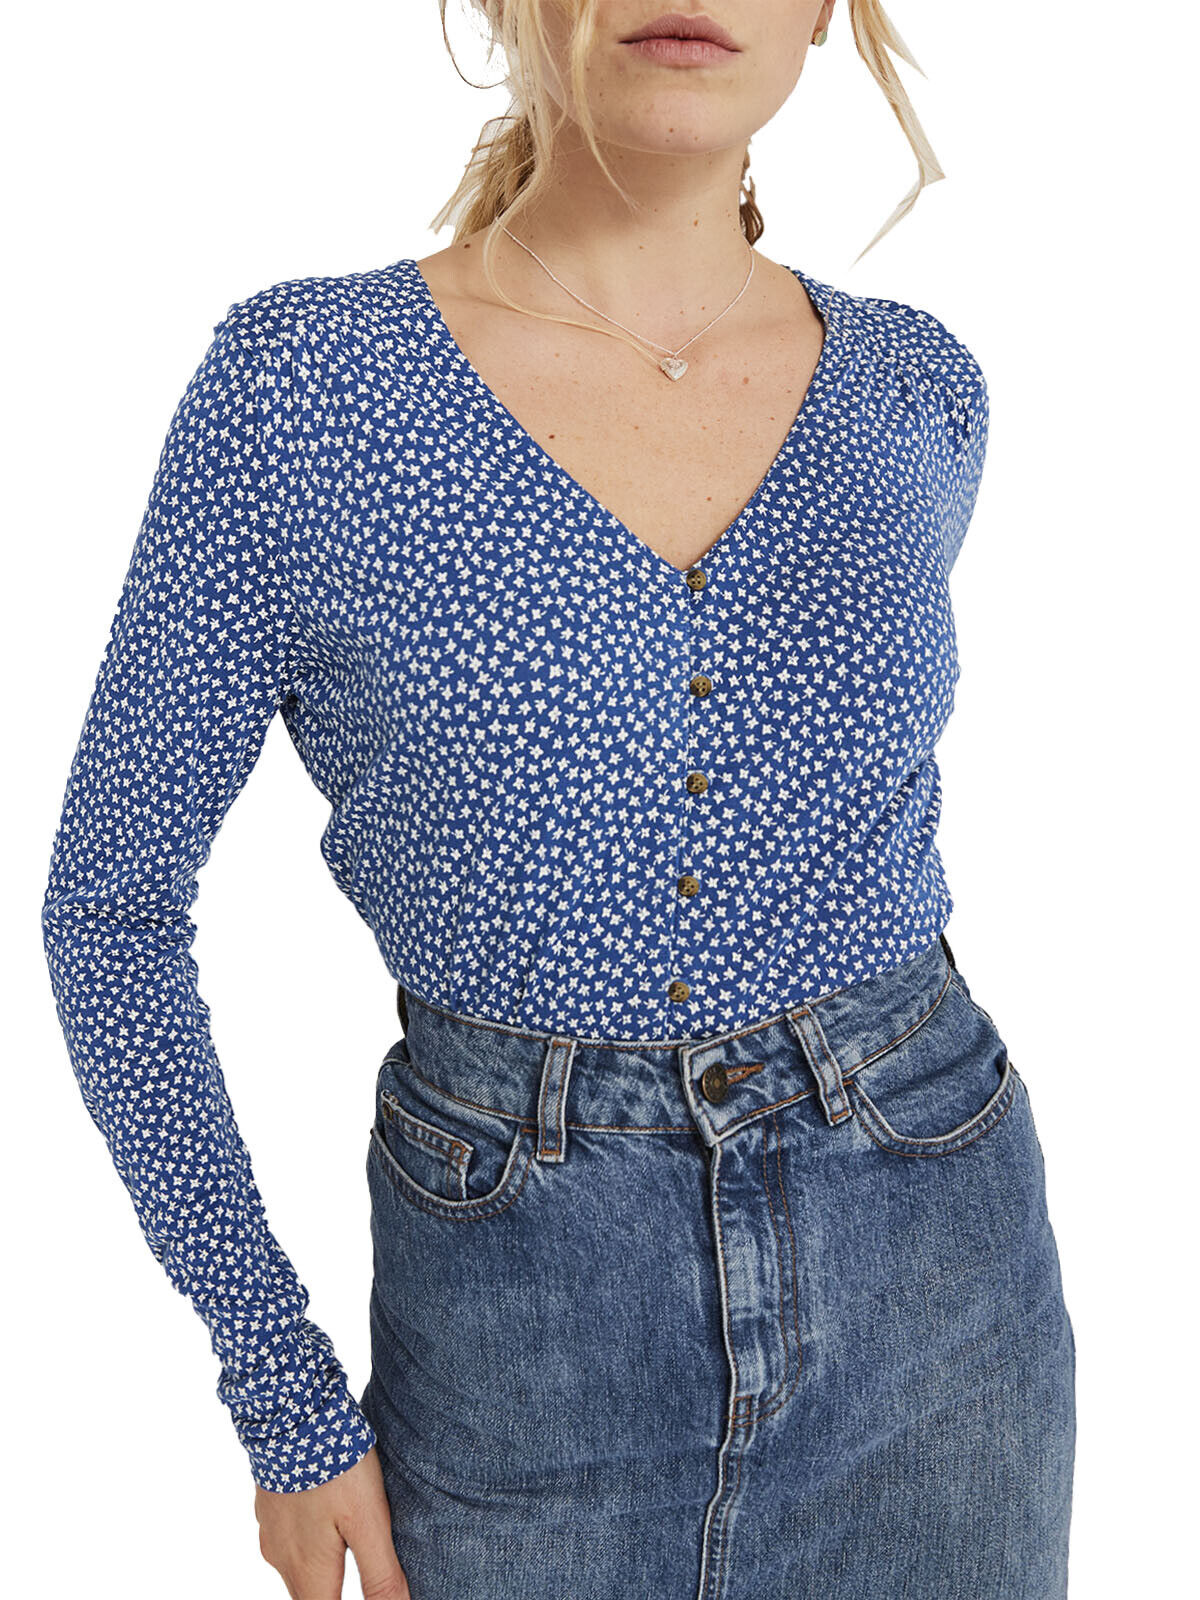 EX Fat Face Indigo Annie Ditsy Long Sleeve Top in Sizes 10 12 16 18 RRP £29.50